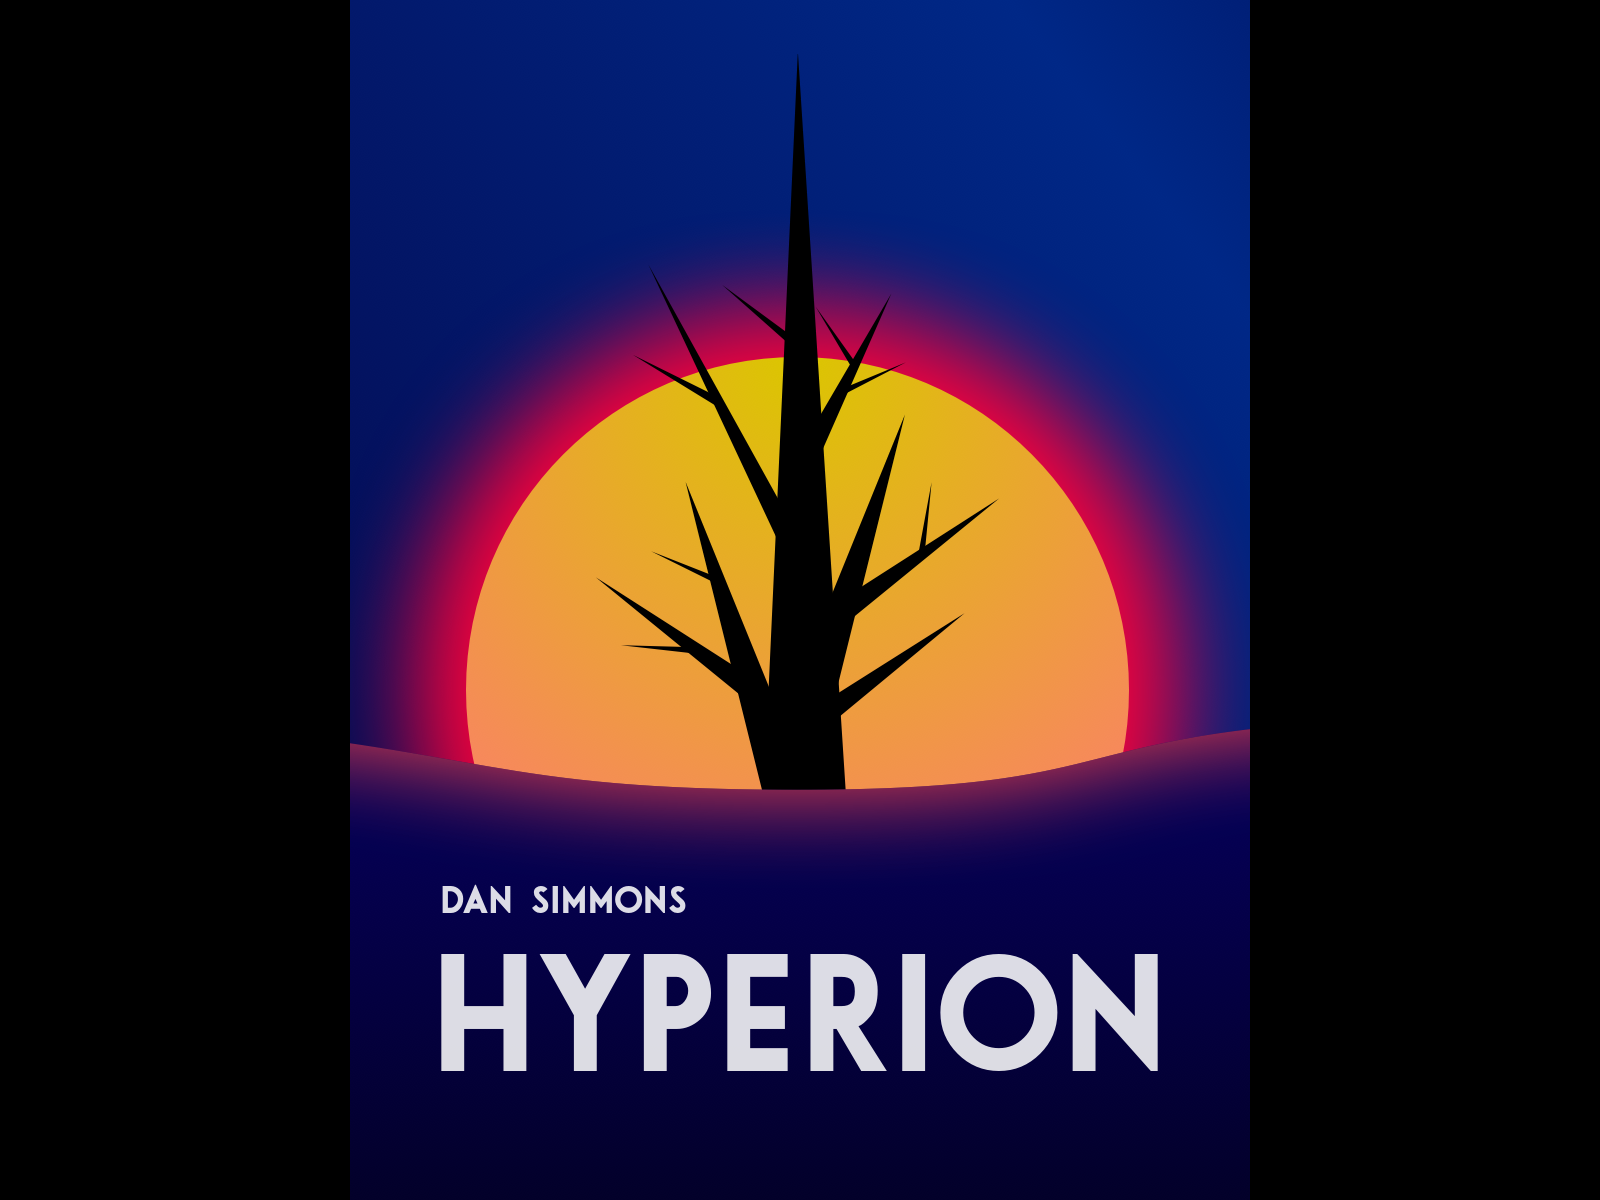 Dan Simmons - Hyperion, book cover.